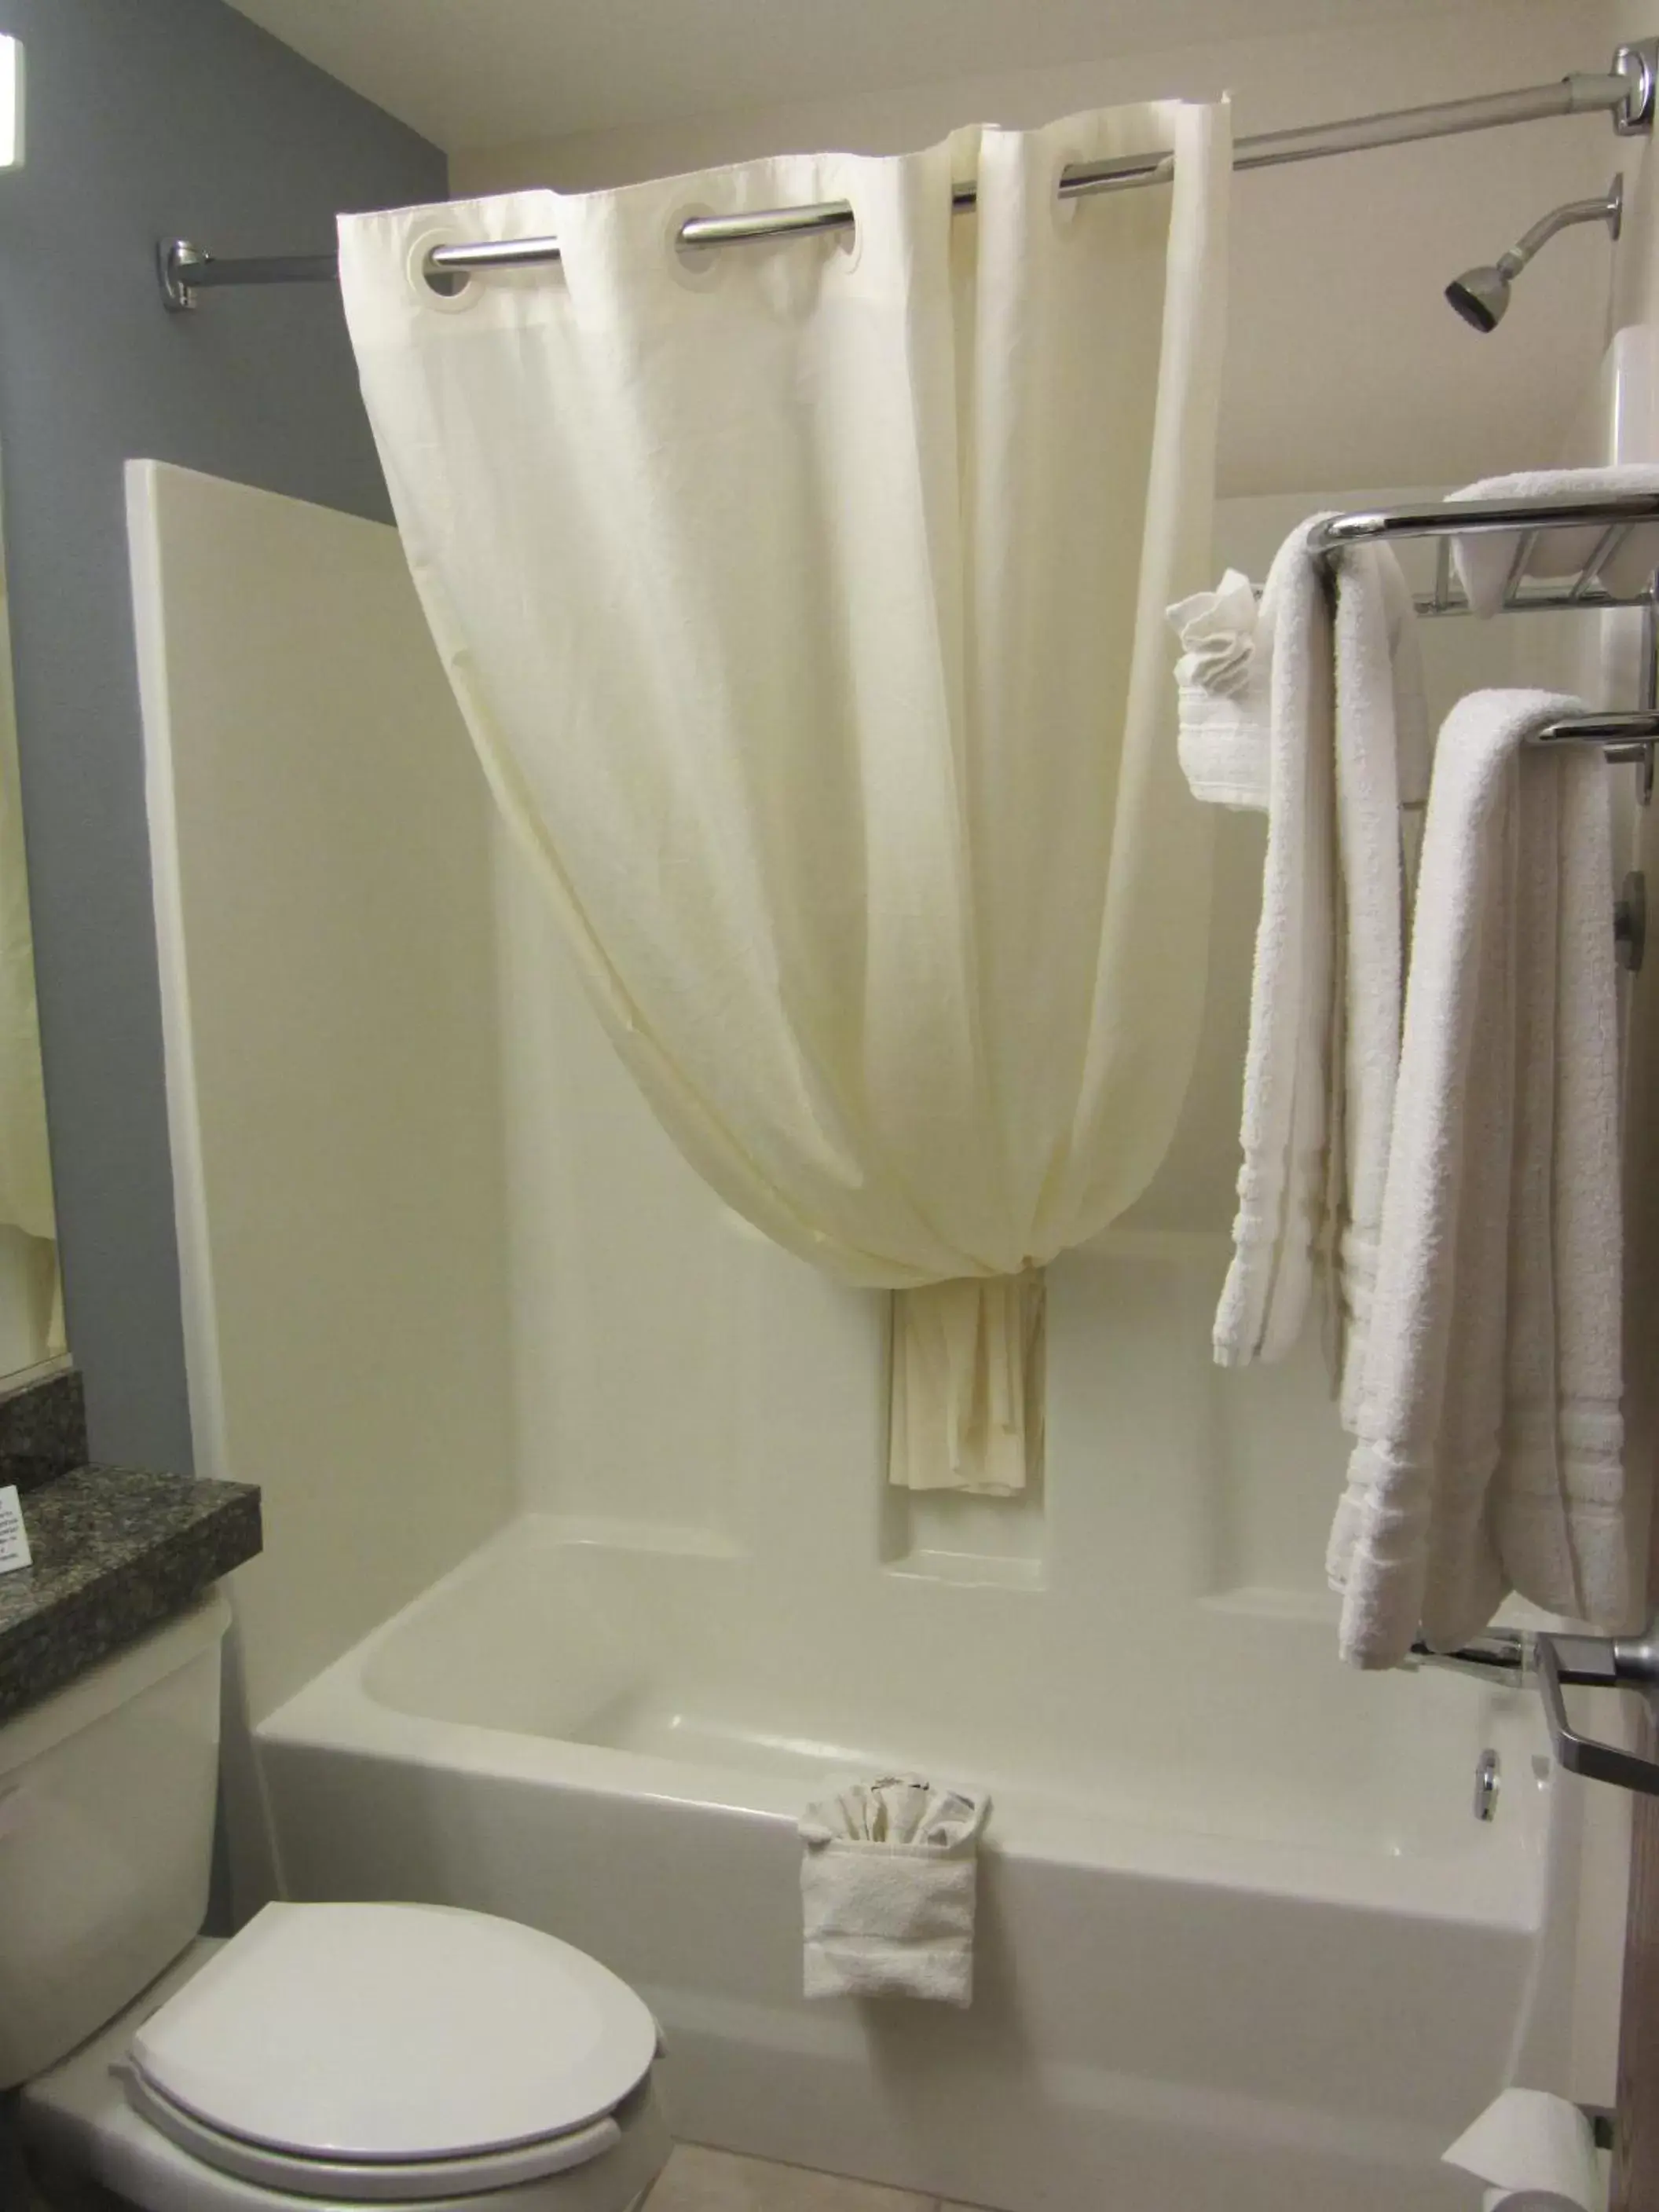 Shower, Bathroom in Microtel Inn and Suites San Angelo